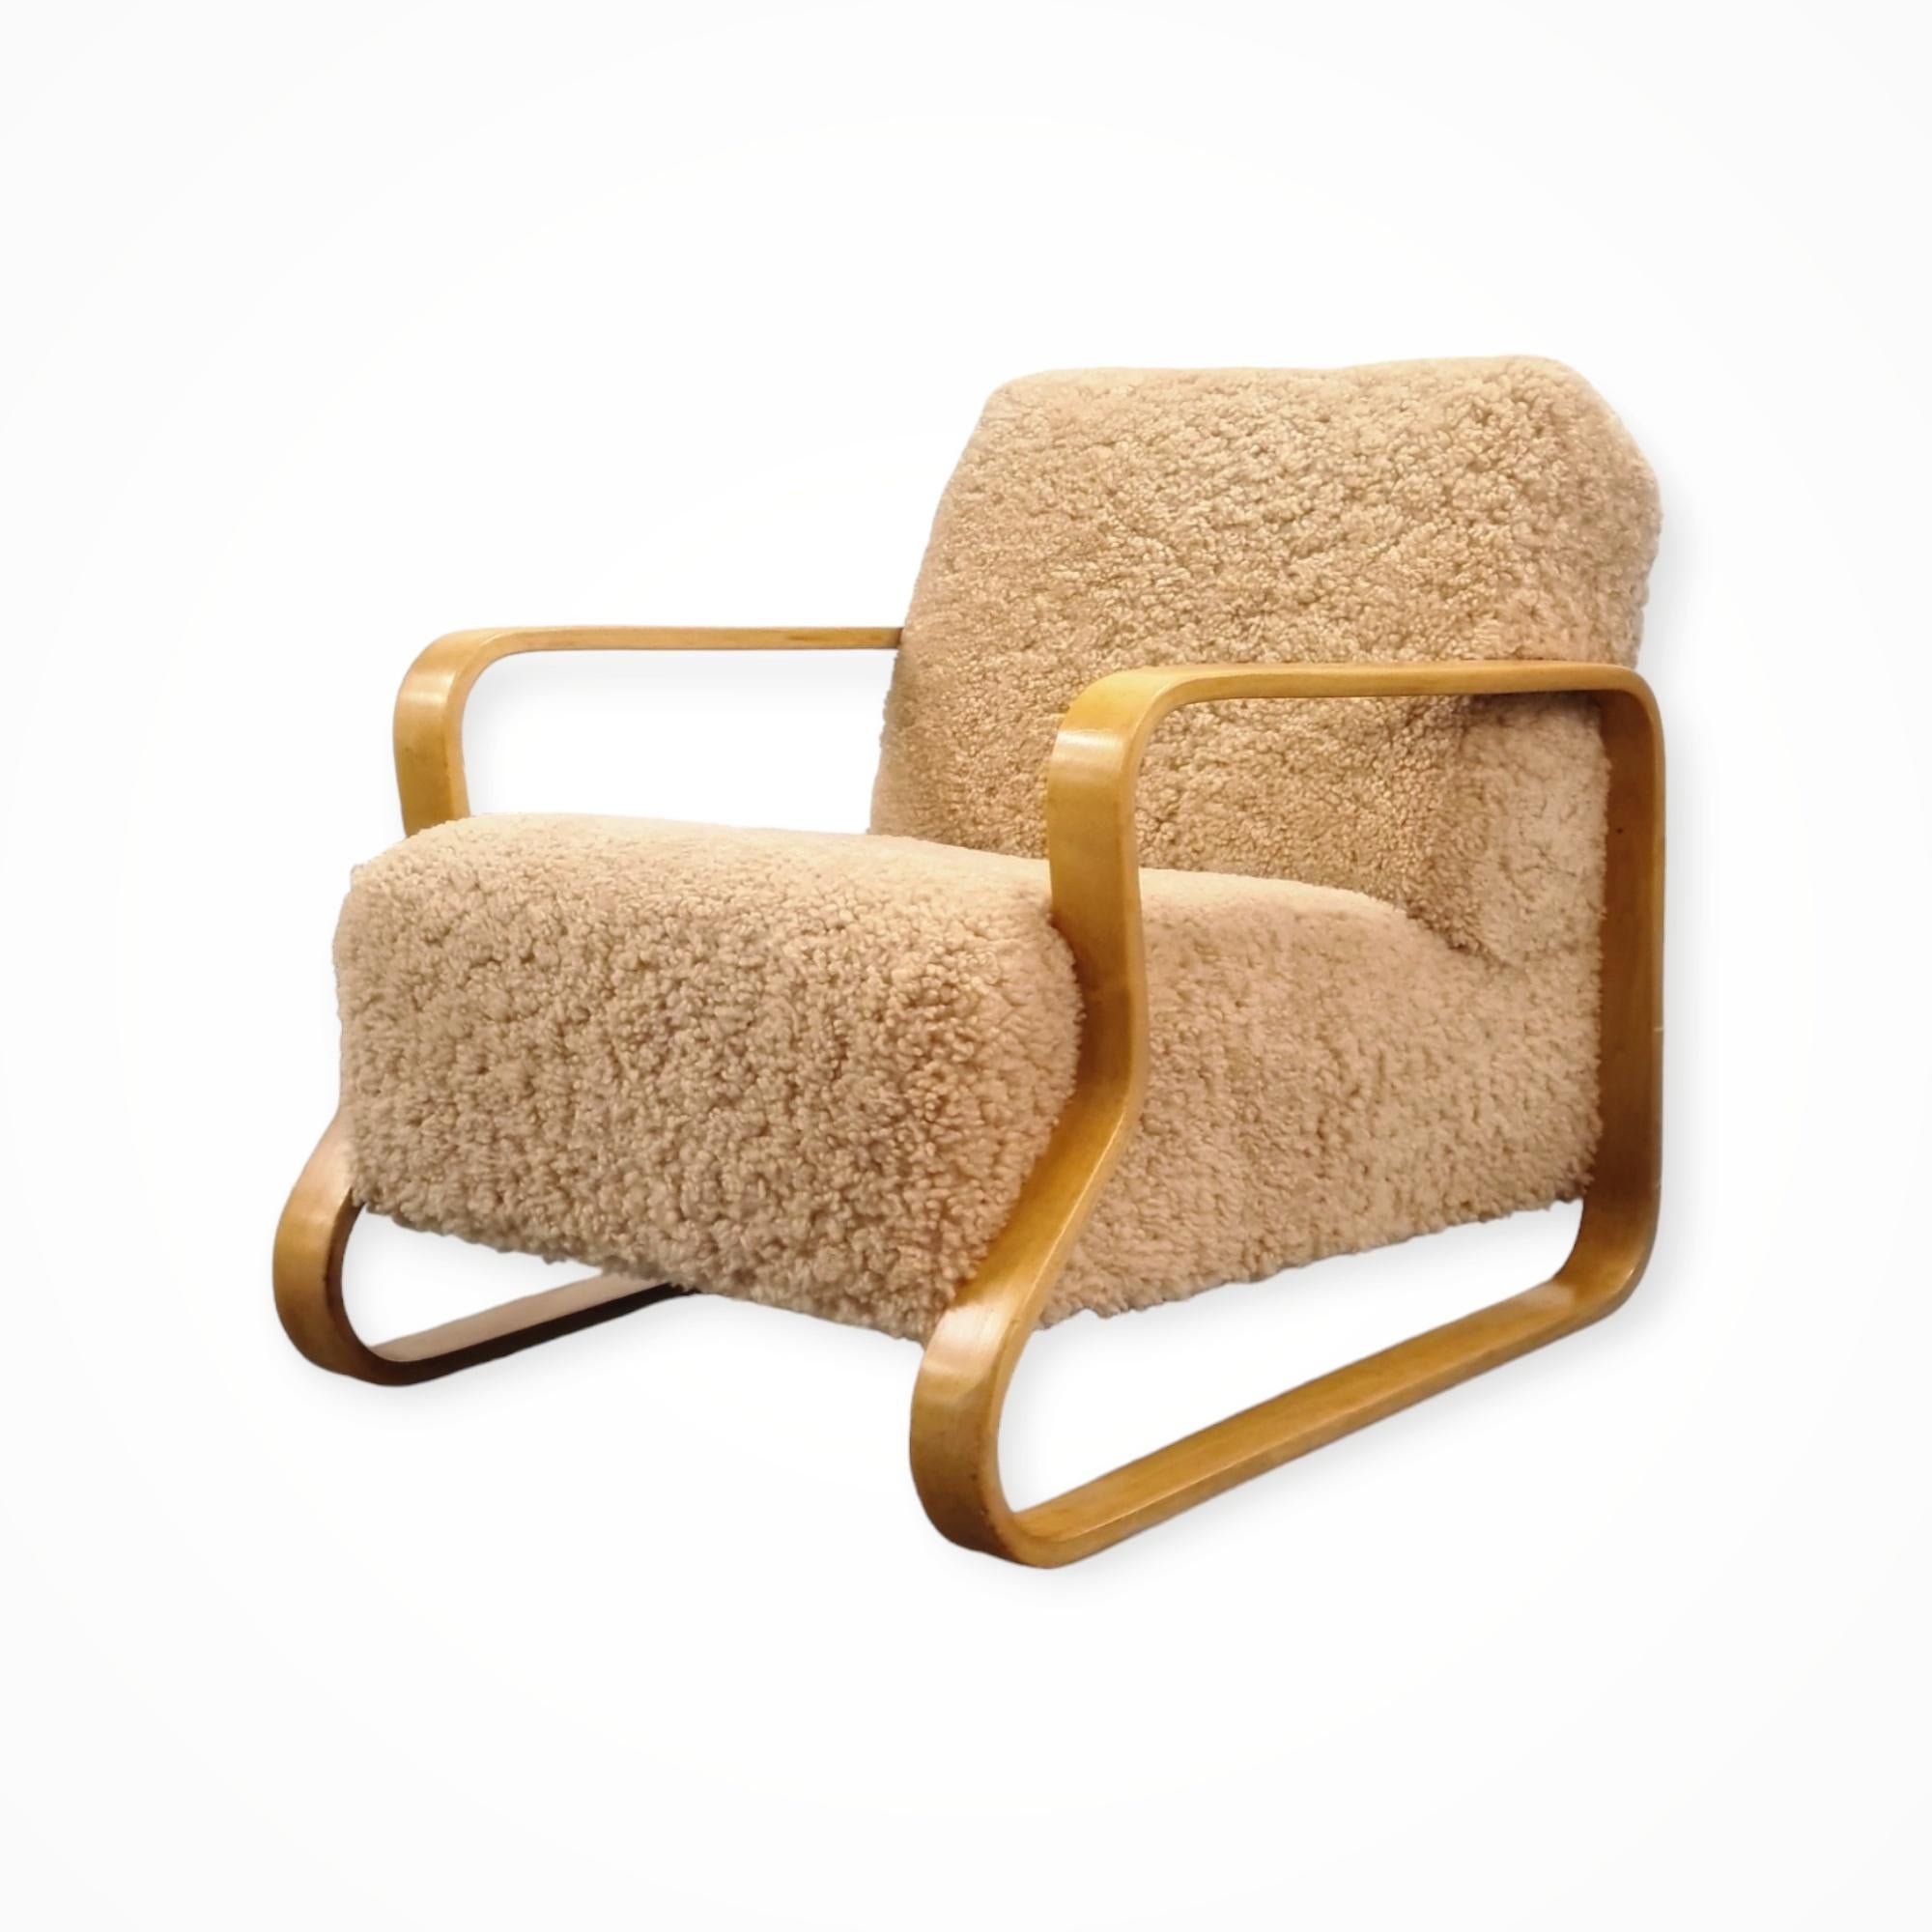 The famous Paimio lounge chair model 41, designed by Alvar Aalto for the Paimio Sanitarium. Manufactured by  Huonekalu-ja Rakennustyötehdas Oy in the 1950s, stamped 